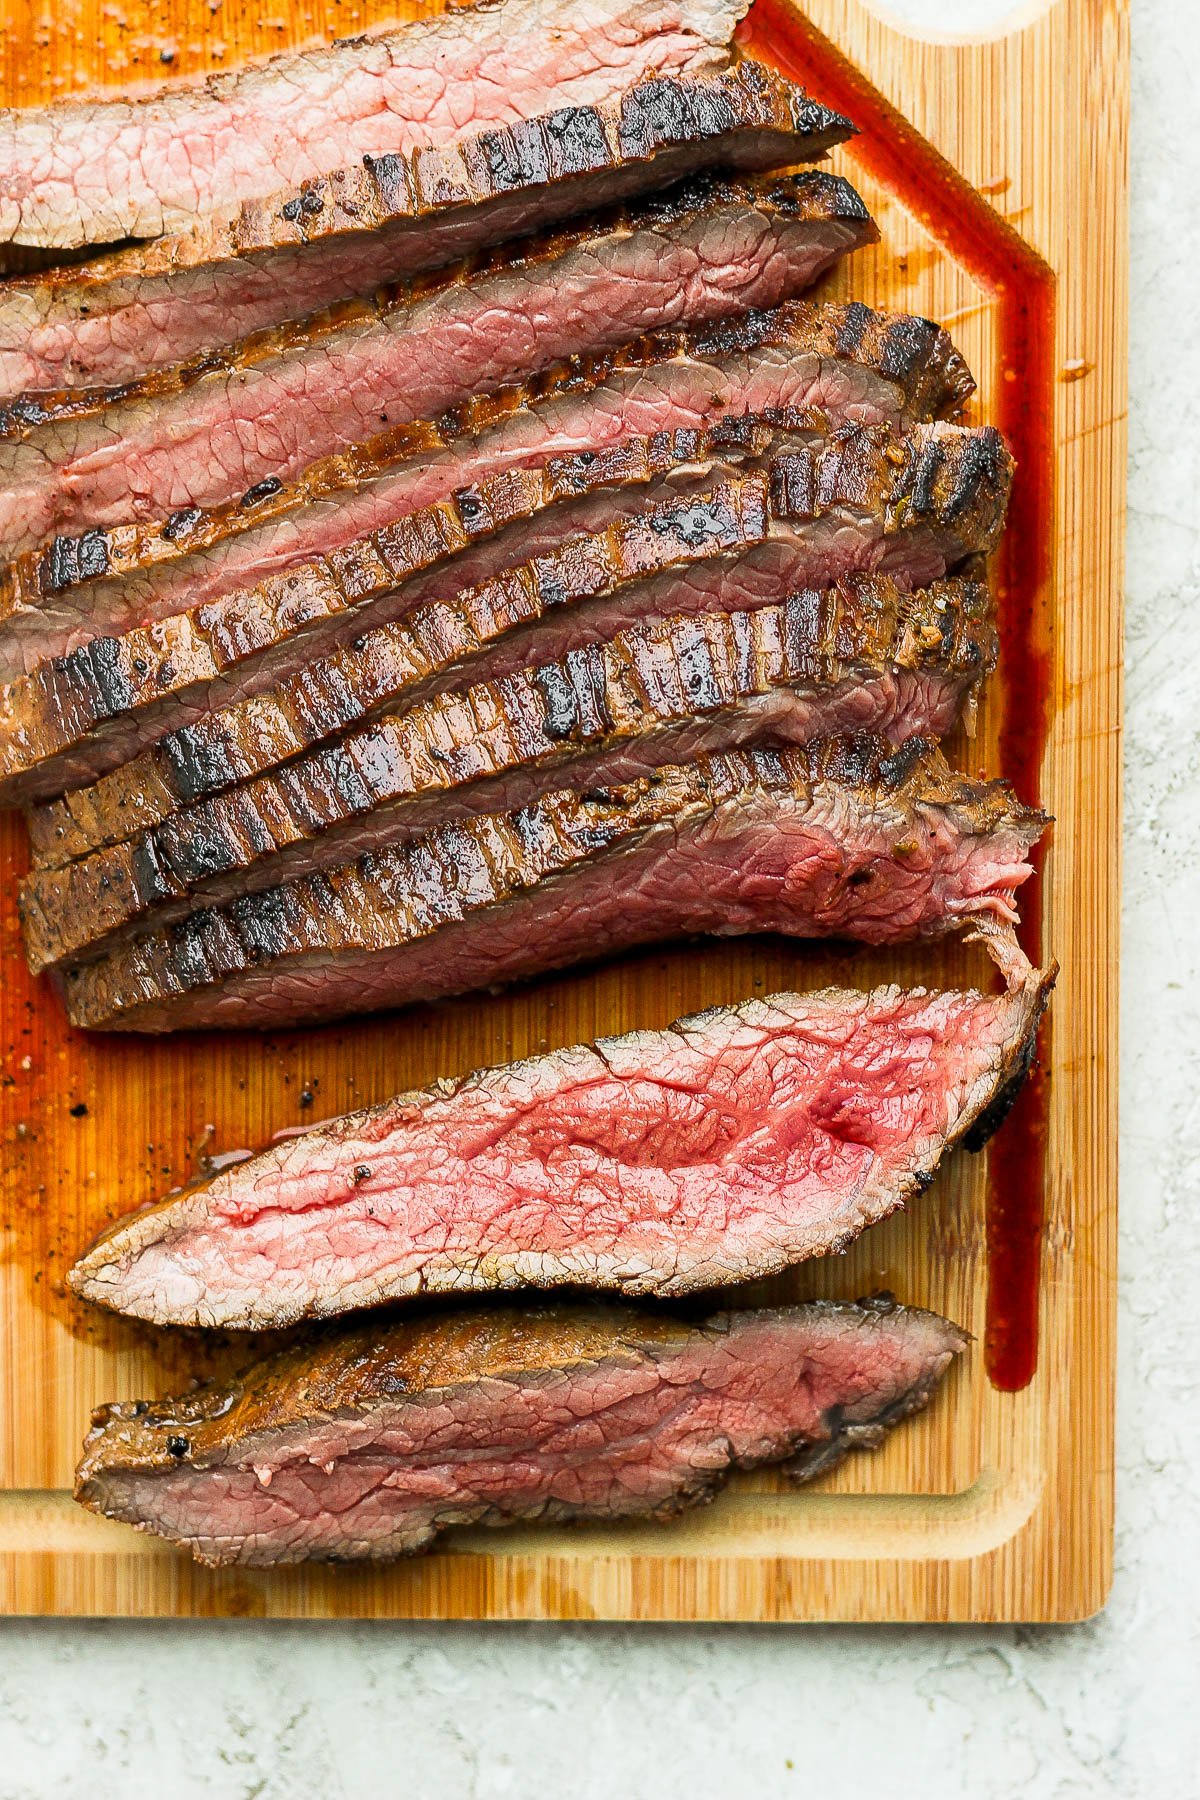 Cooked flank steak on a wood cutting board, sliced vertically against the grain of the meat fibers. 